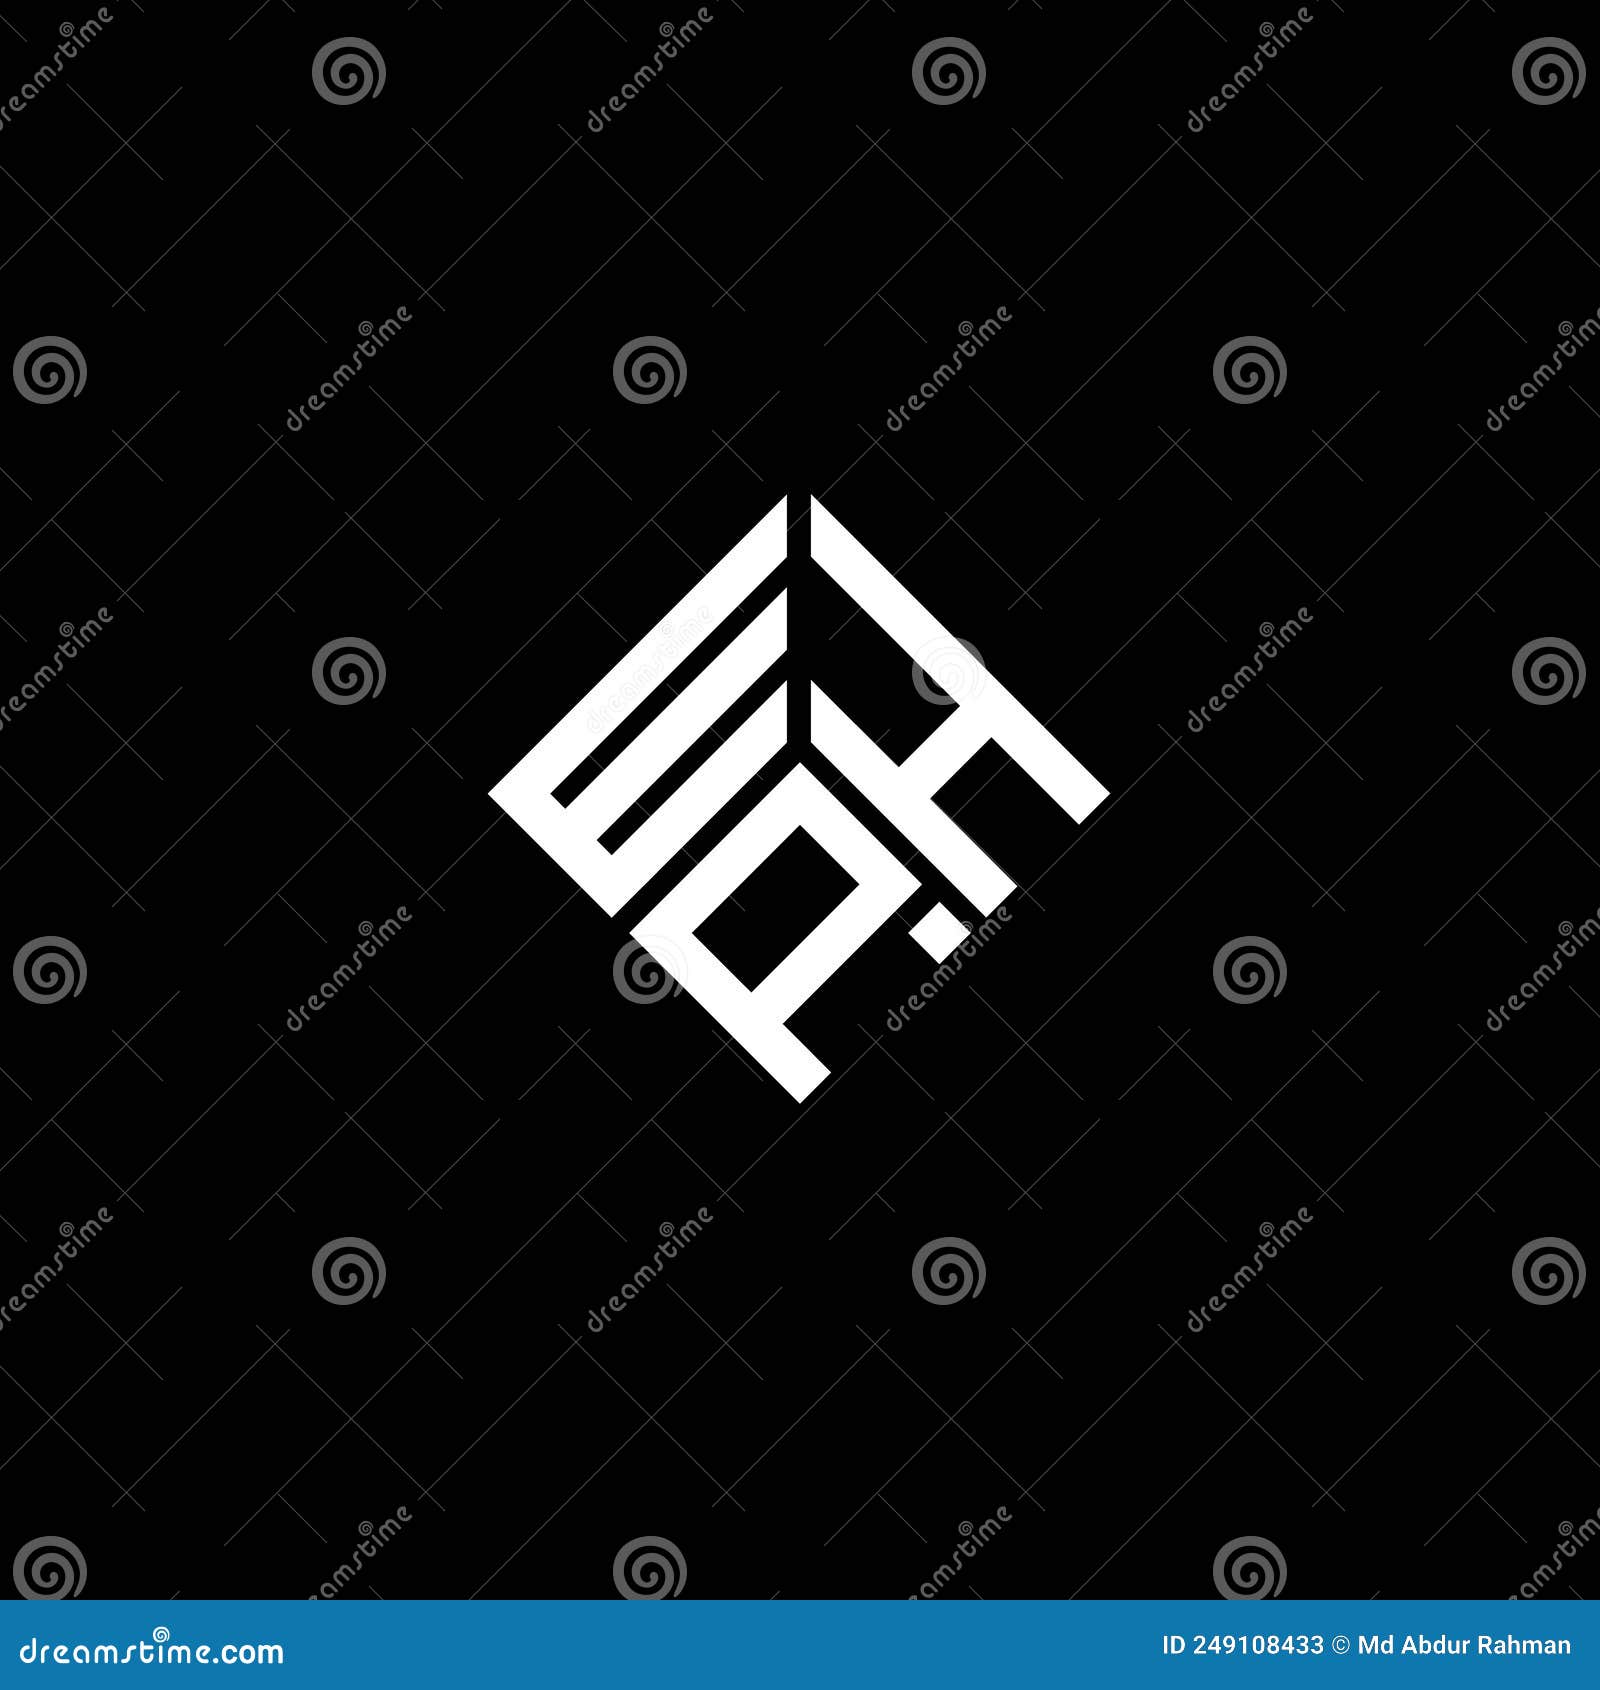 whp letter logo  on black background. whp creative initials letter logo concept. whp letter 